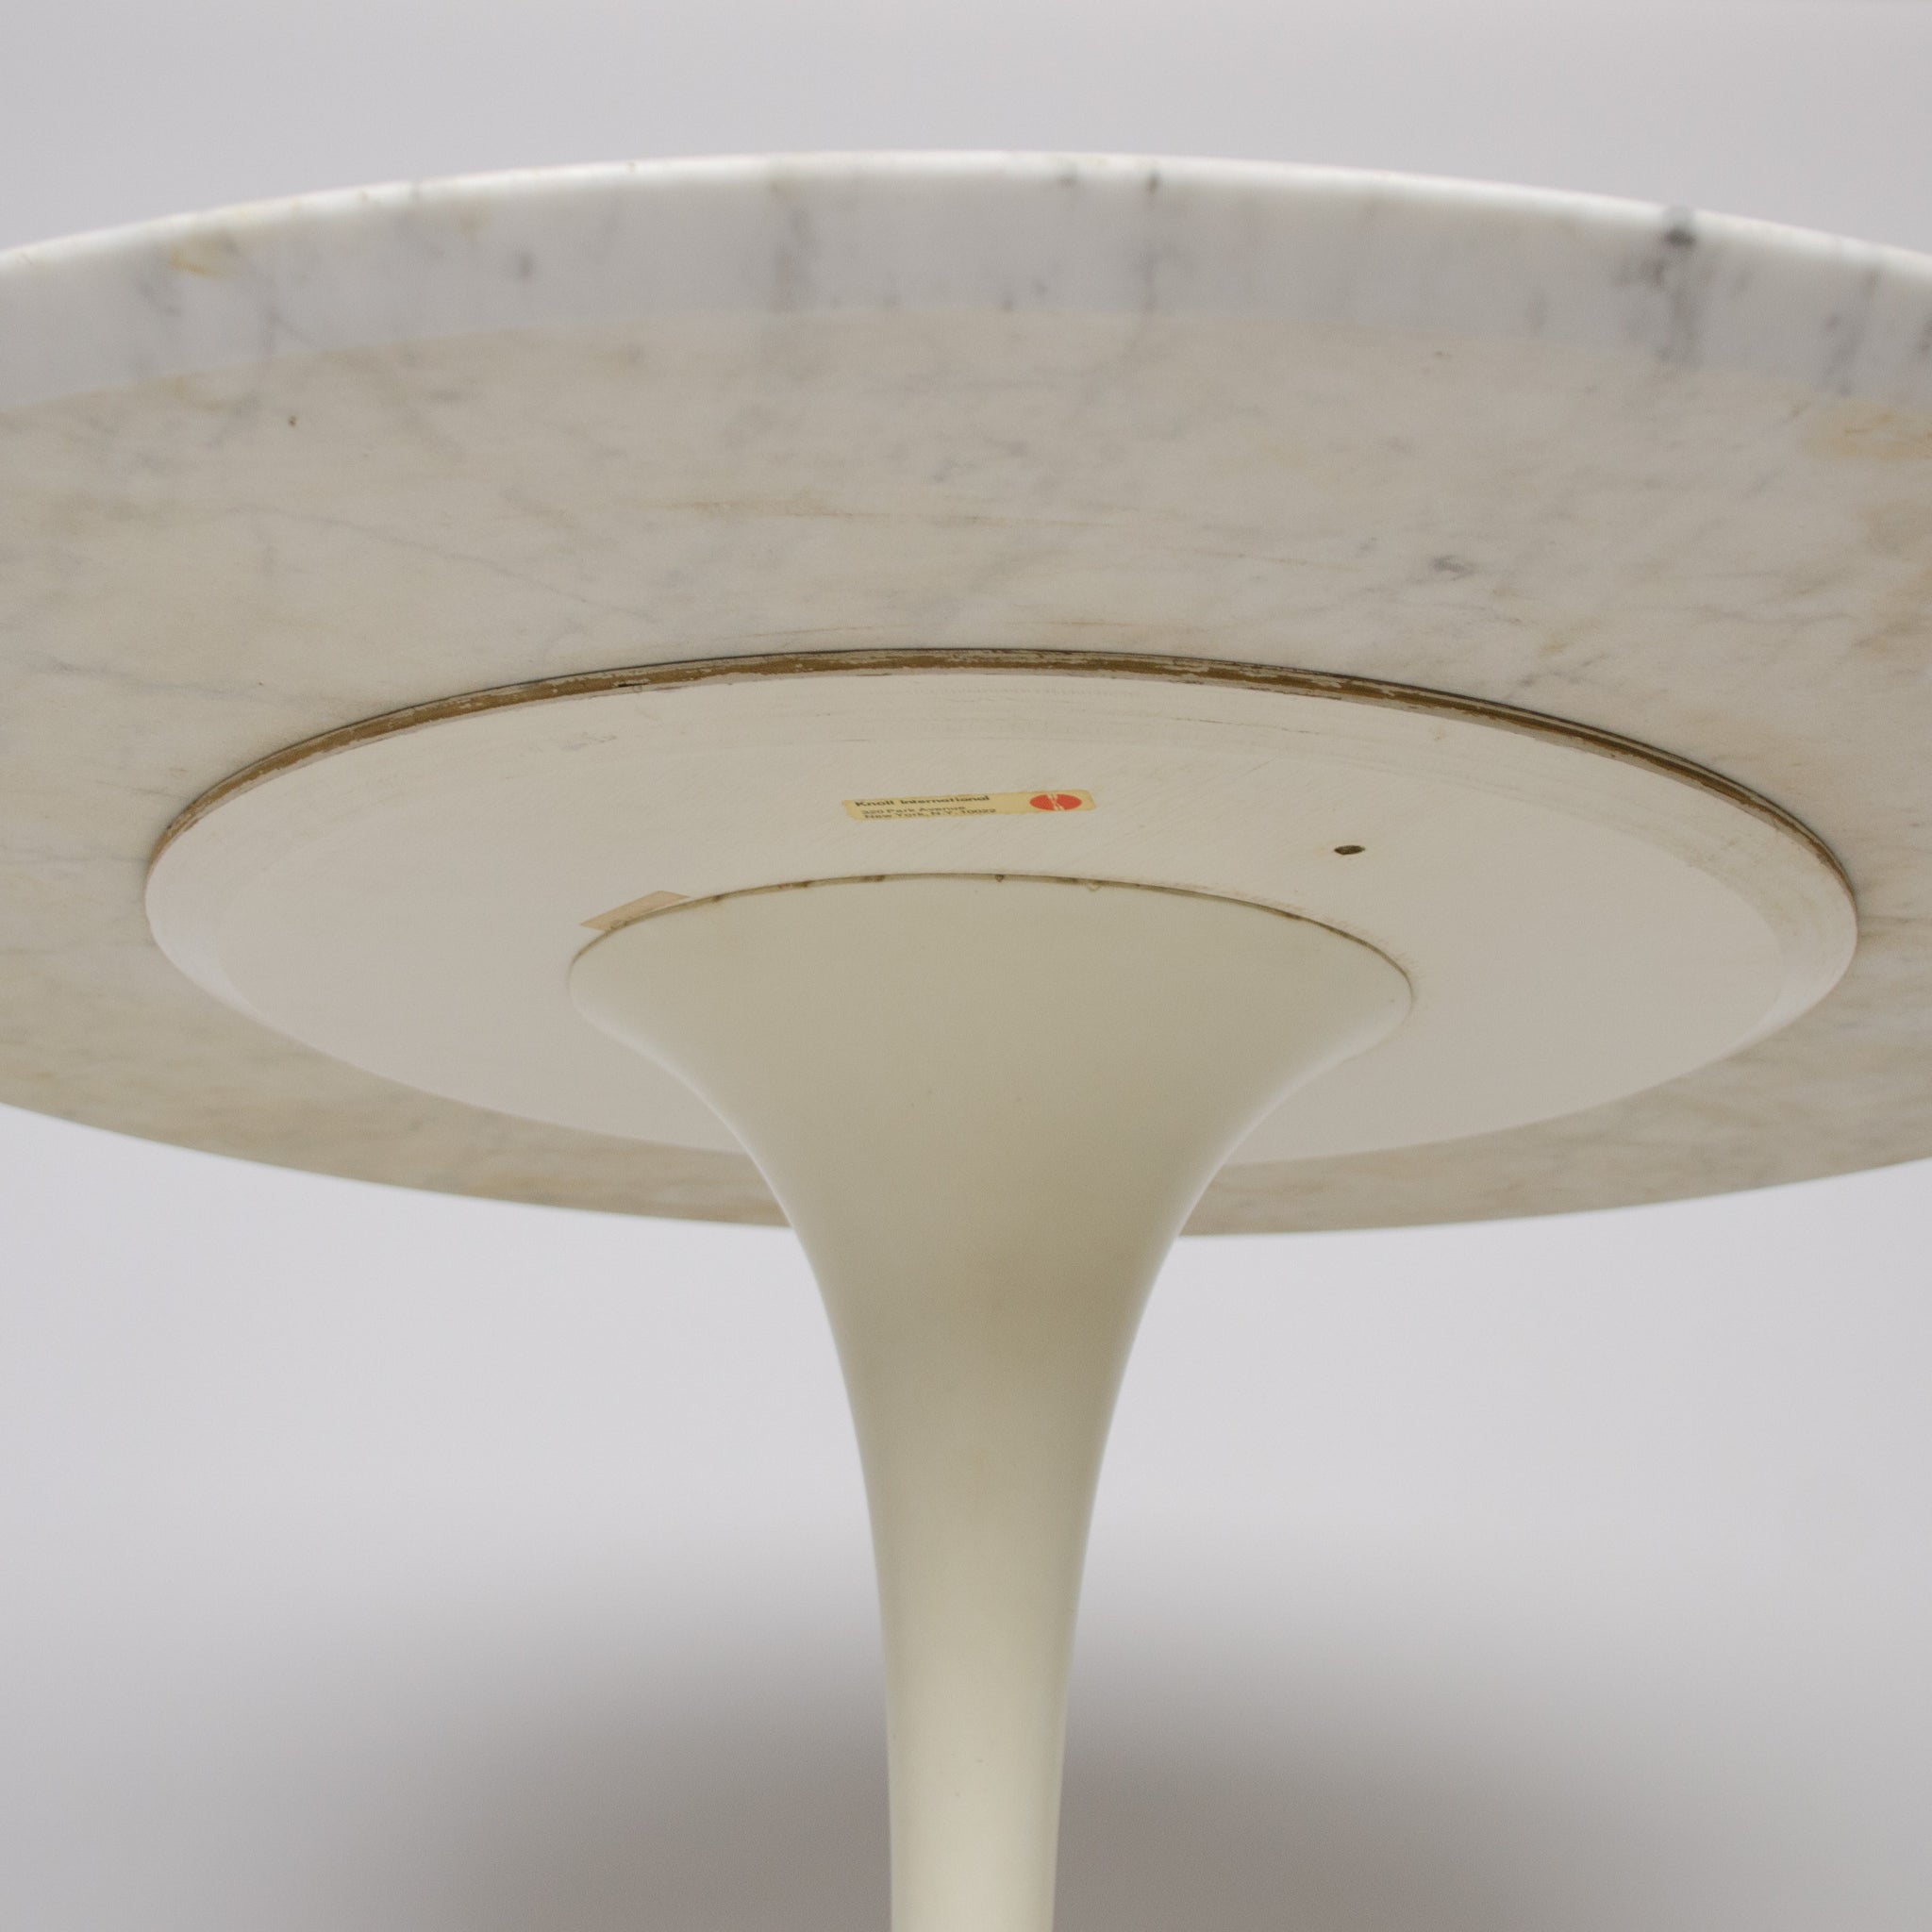 SOLD Eero Saarinen For Knoll 36 Inch White Marble Tulip Dining Table 1960's